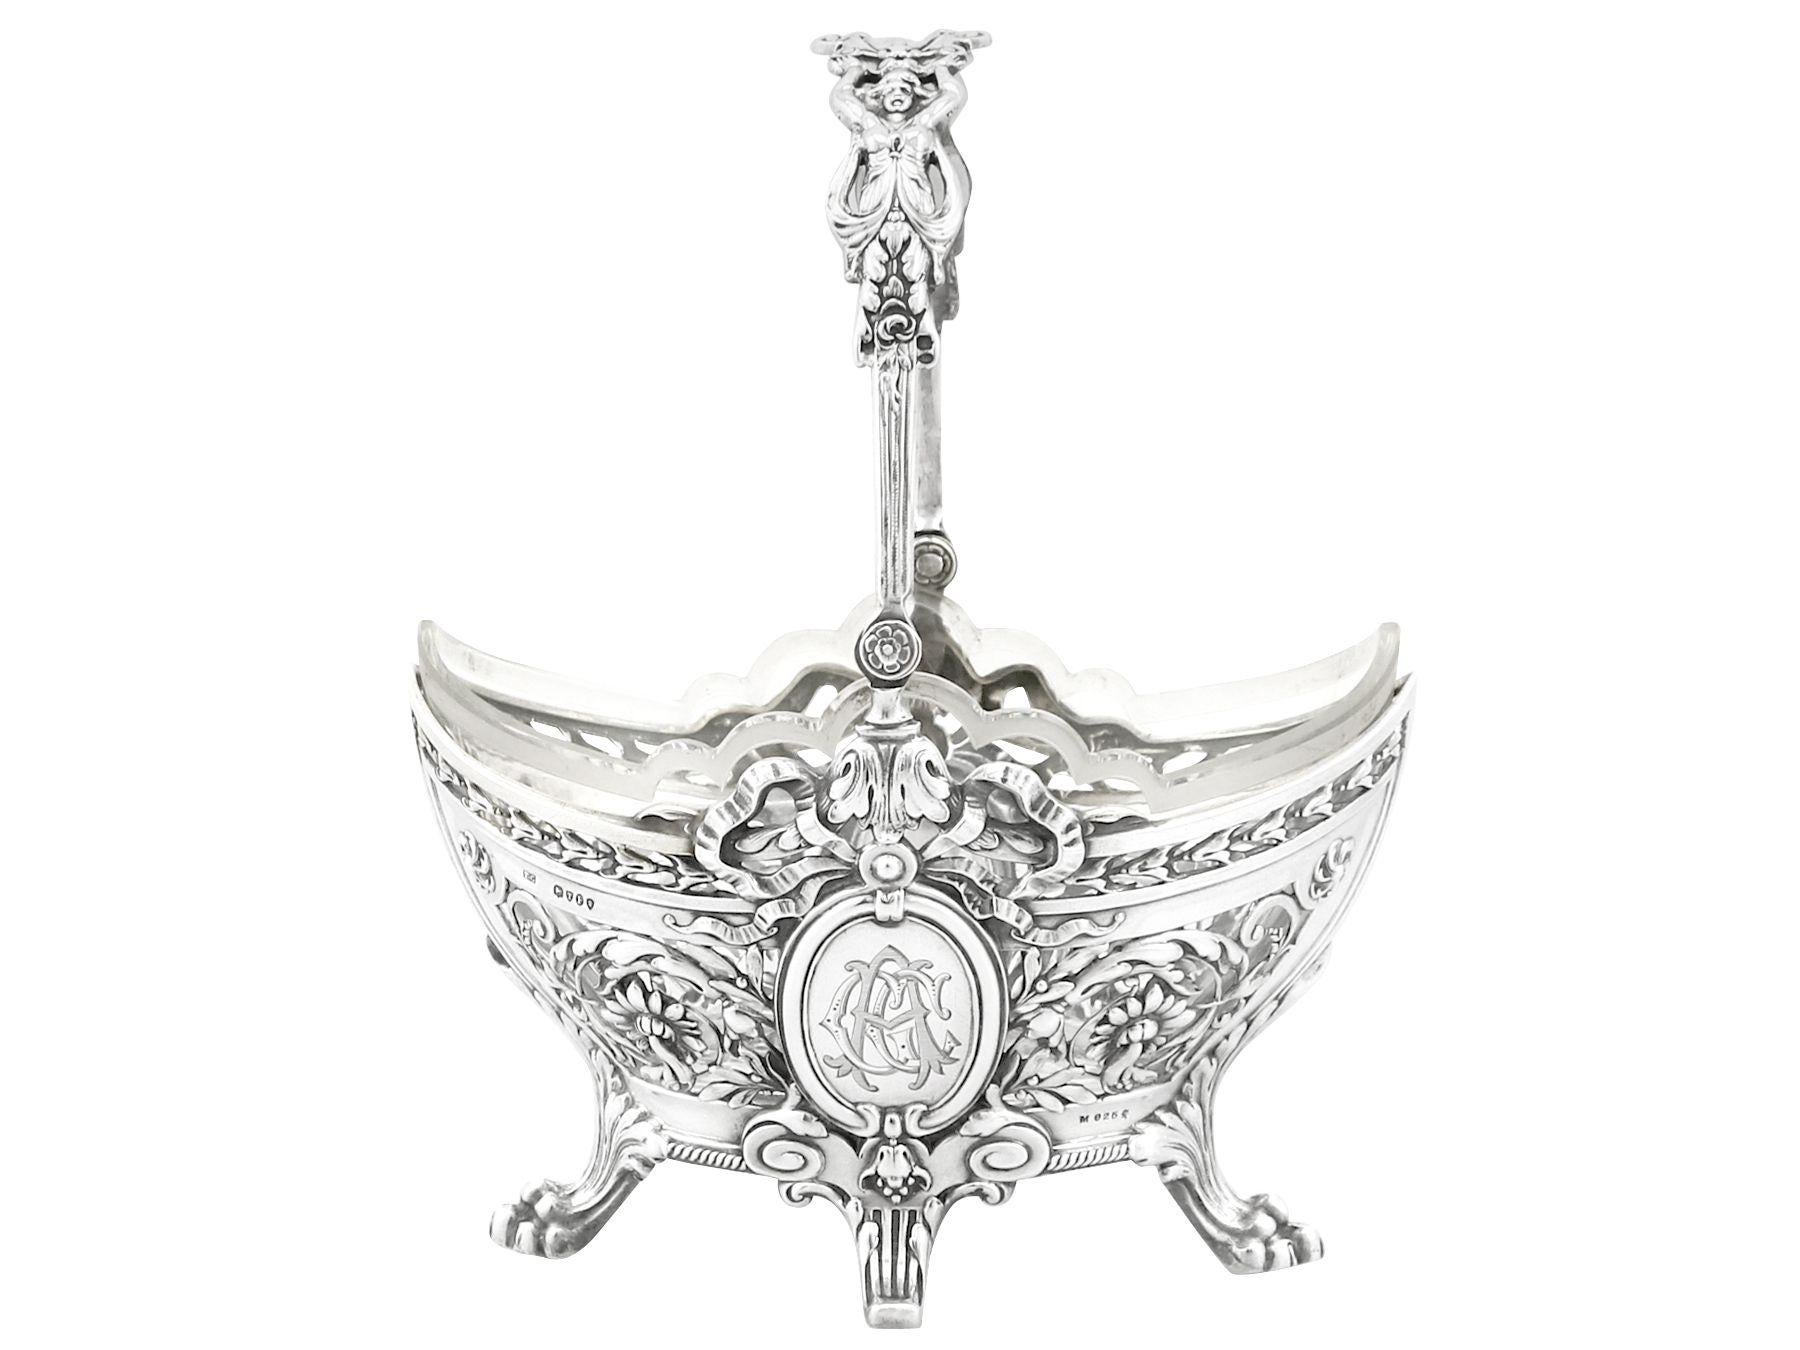 An exceptional, fine and impressive antique Victorian English sterling silver bon bon basket; an addition to our silverware collection.

This exceptional antique Victorian sterling silver basket has an oval, navette shaped form to four